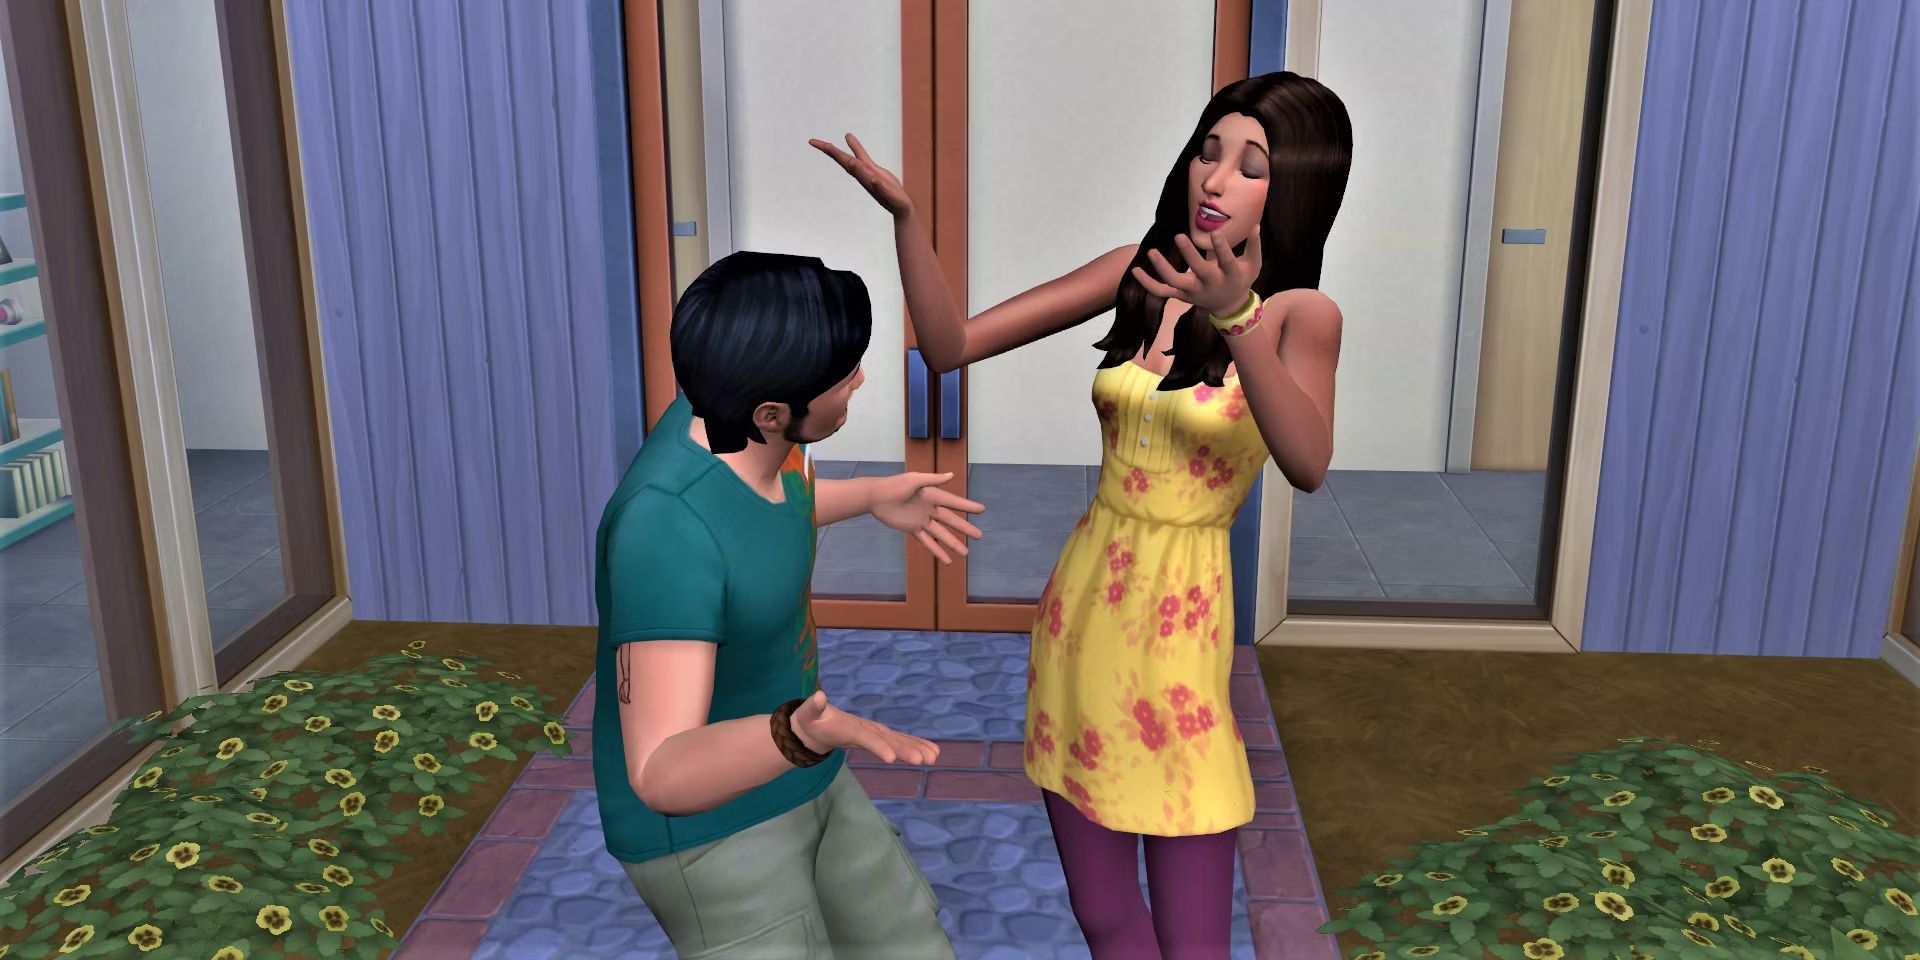 Two members of the Roomie household chatting in The Sims 4.